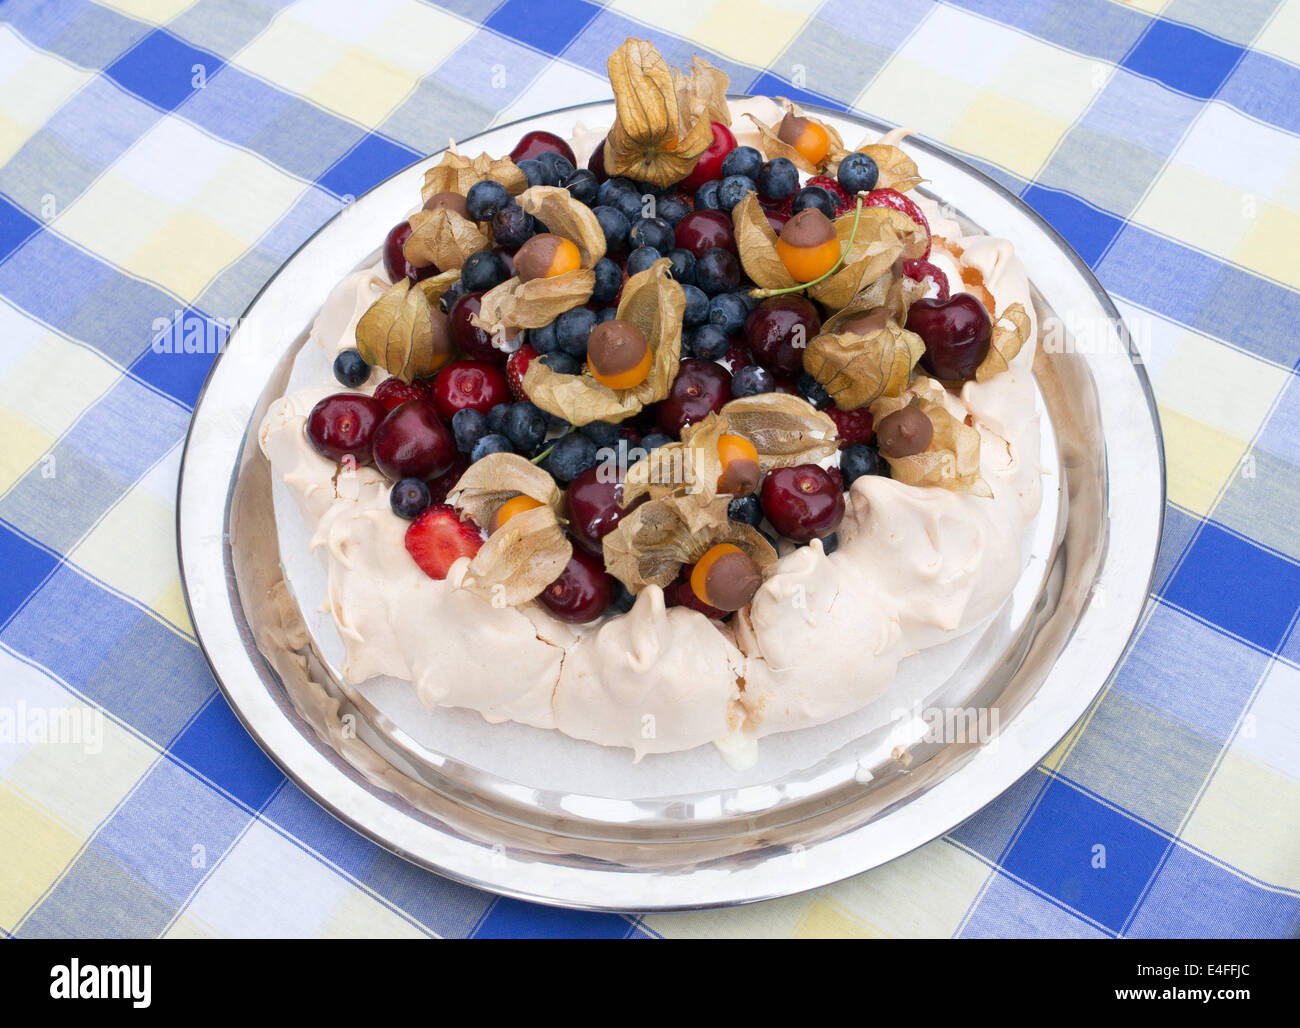 Fresh Fruit Pavlova, meringue topped with fresh fruit including physalis dipped in chocolate on a blue and white tablecloth Stock Photo